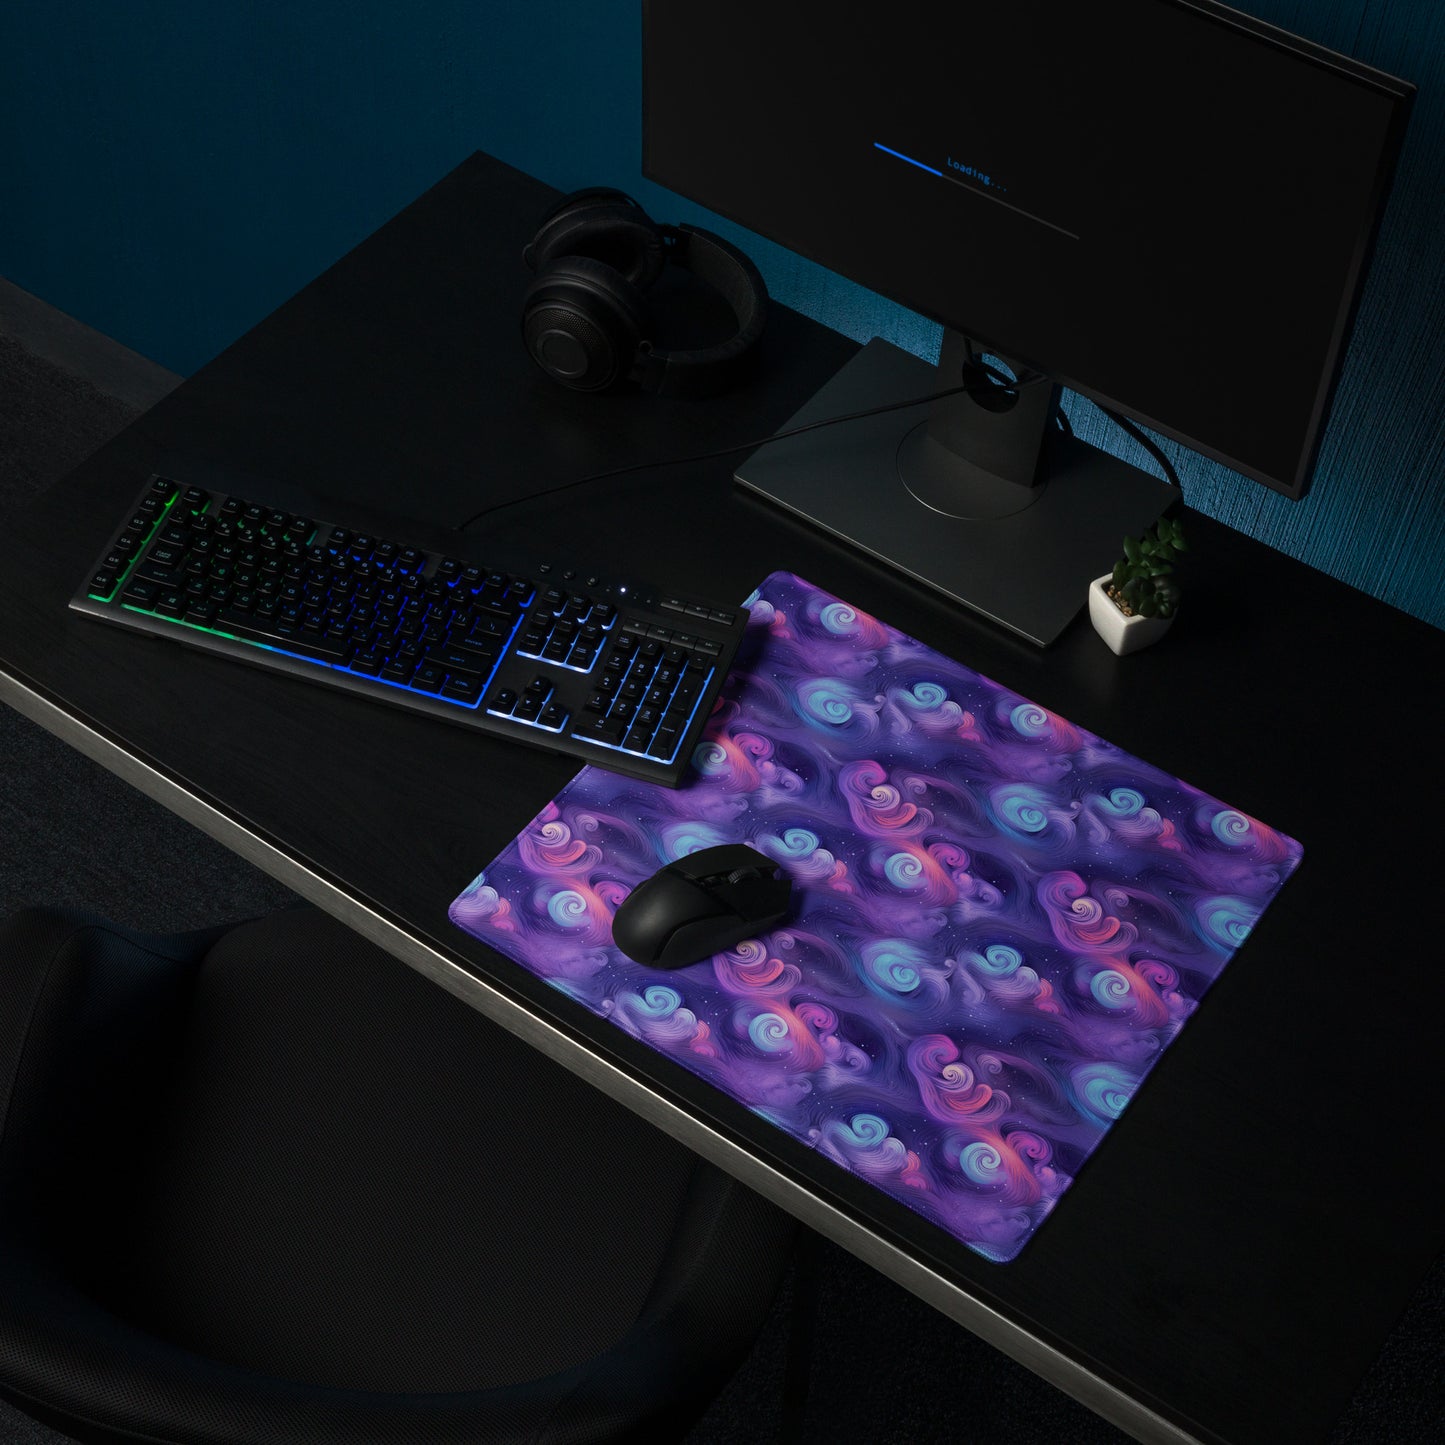 A 18" x 16" desk pad with fluffy clouds and stars on it shown on a desk setup. Blue and Purple in color